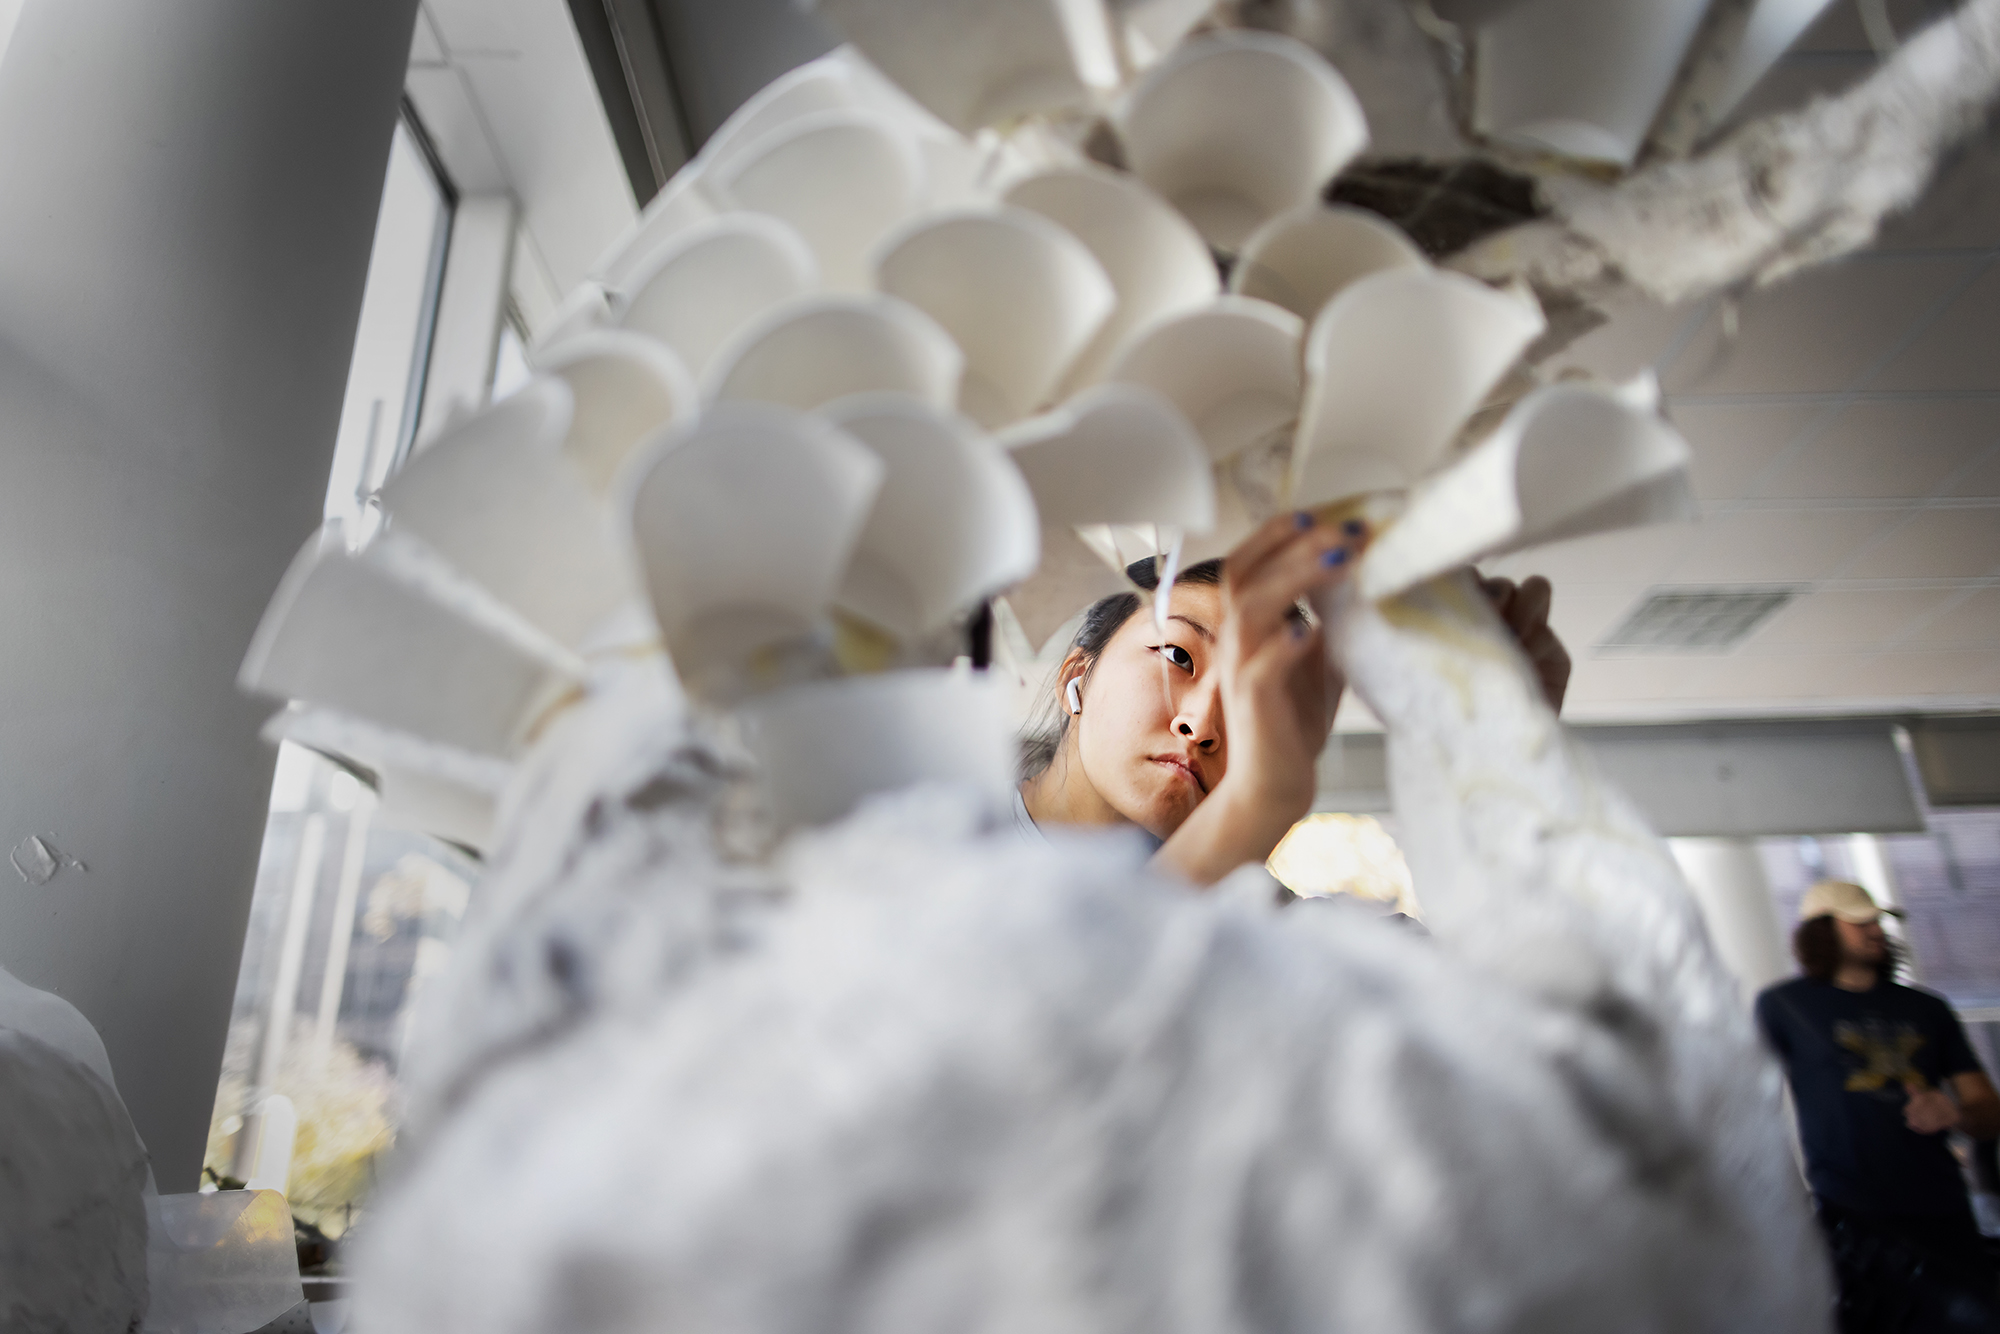 student using paper cups for a sculpture